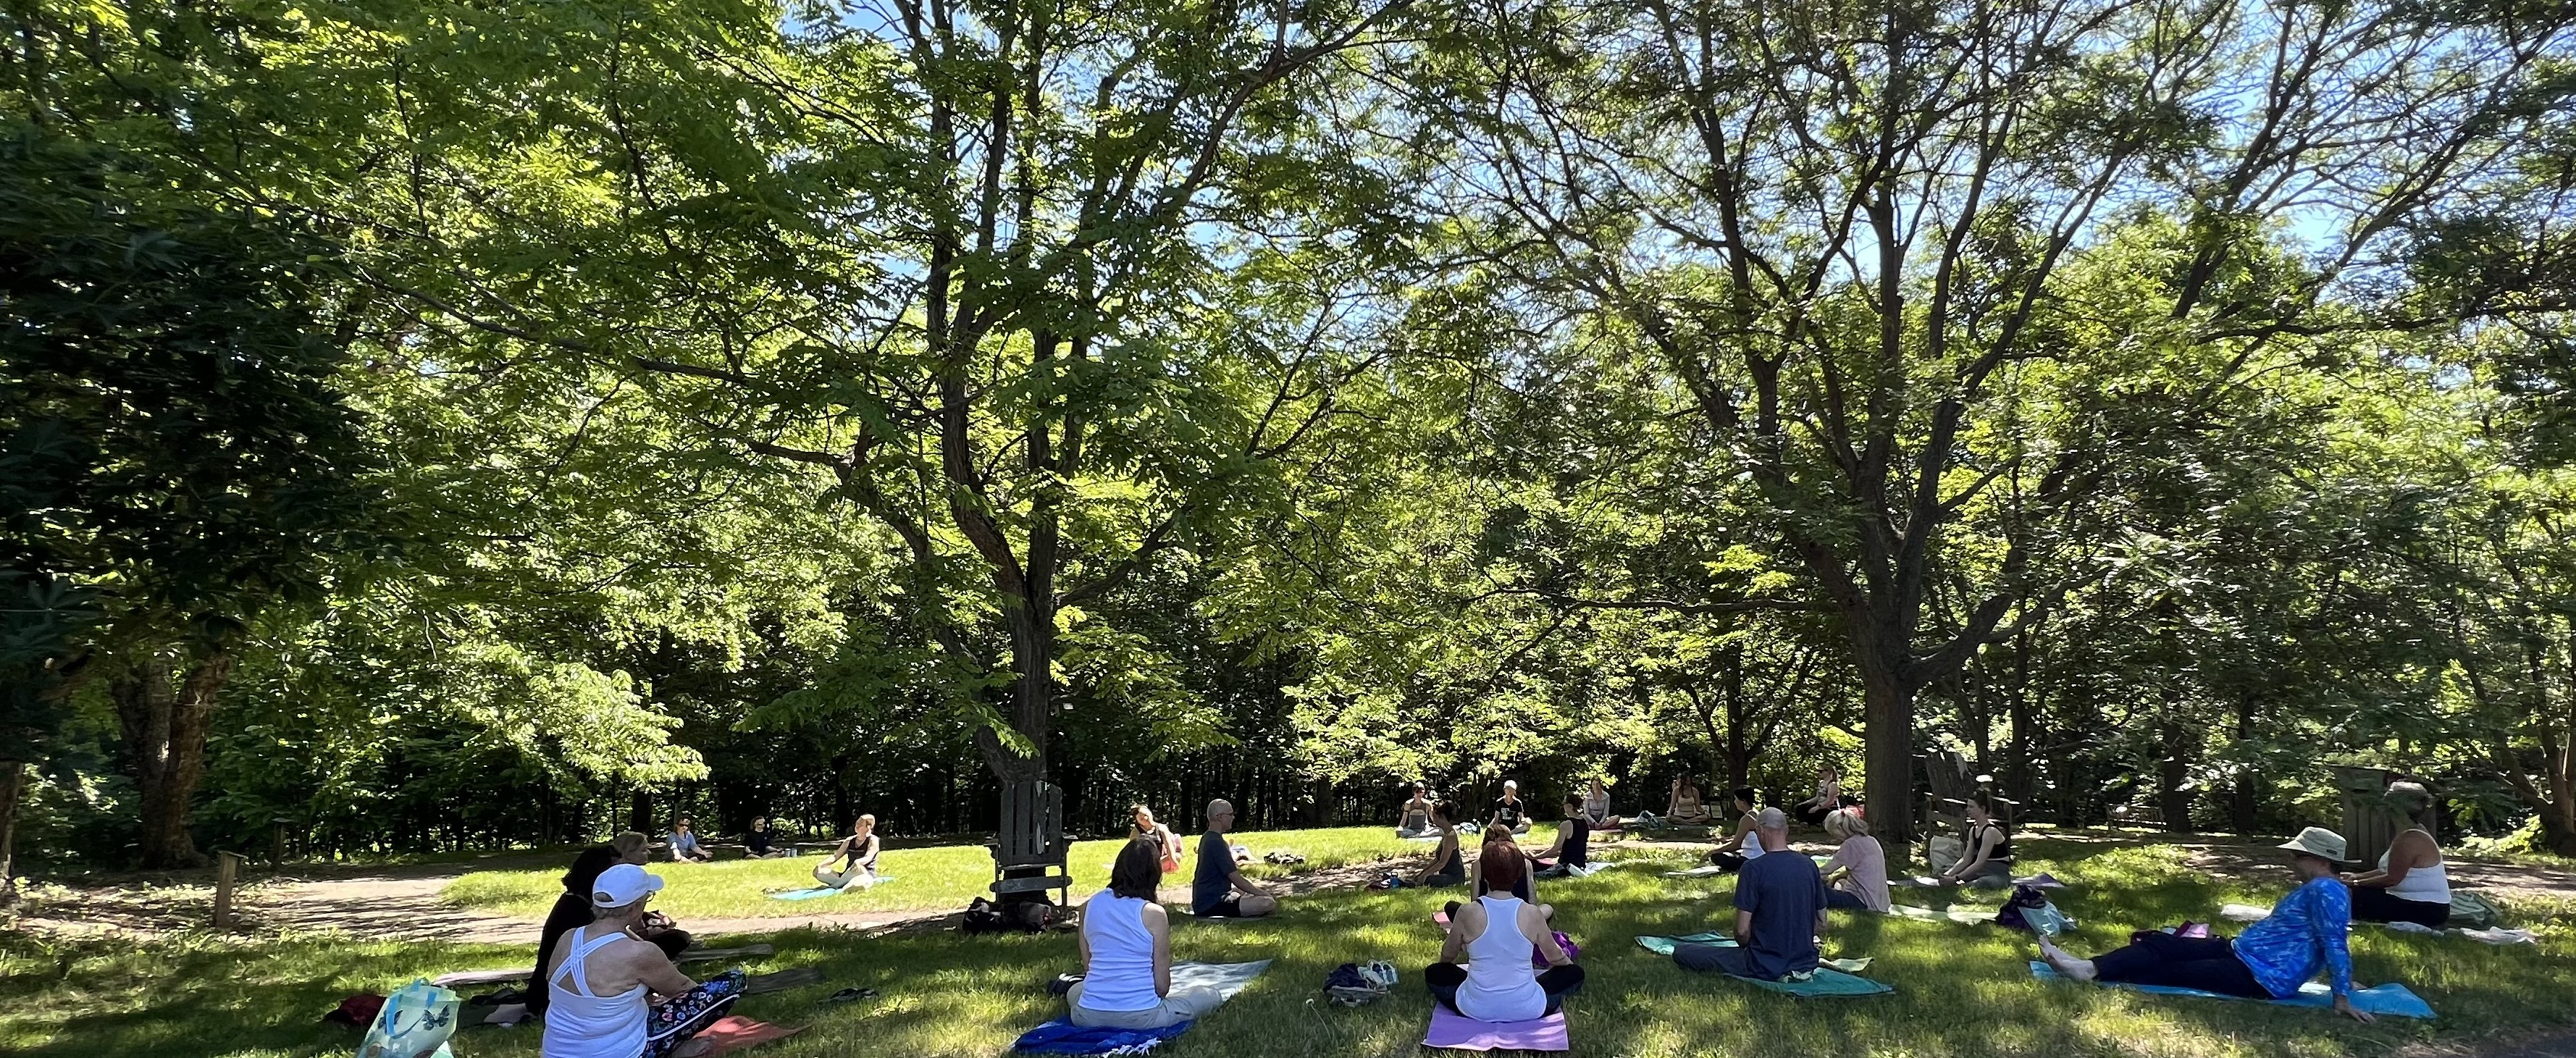 Matthew sitting under trees surrounded by people in a yoga class